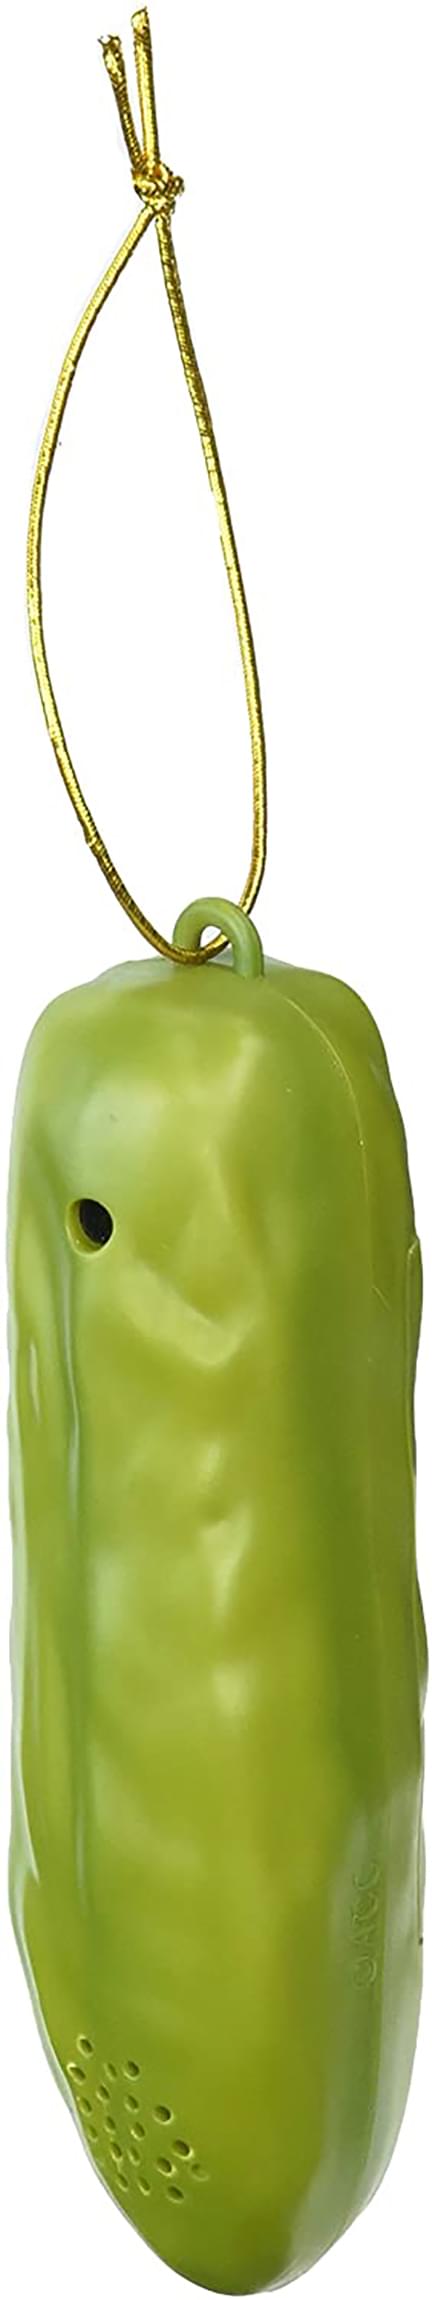 Lucky Electronic Yodelling Pickle Holiday Ornament